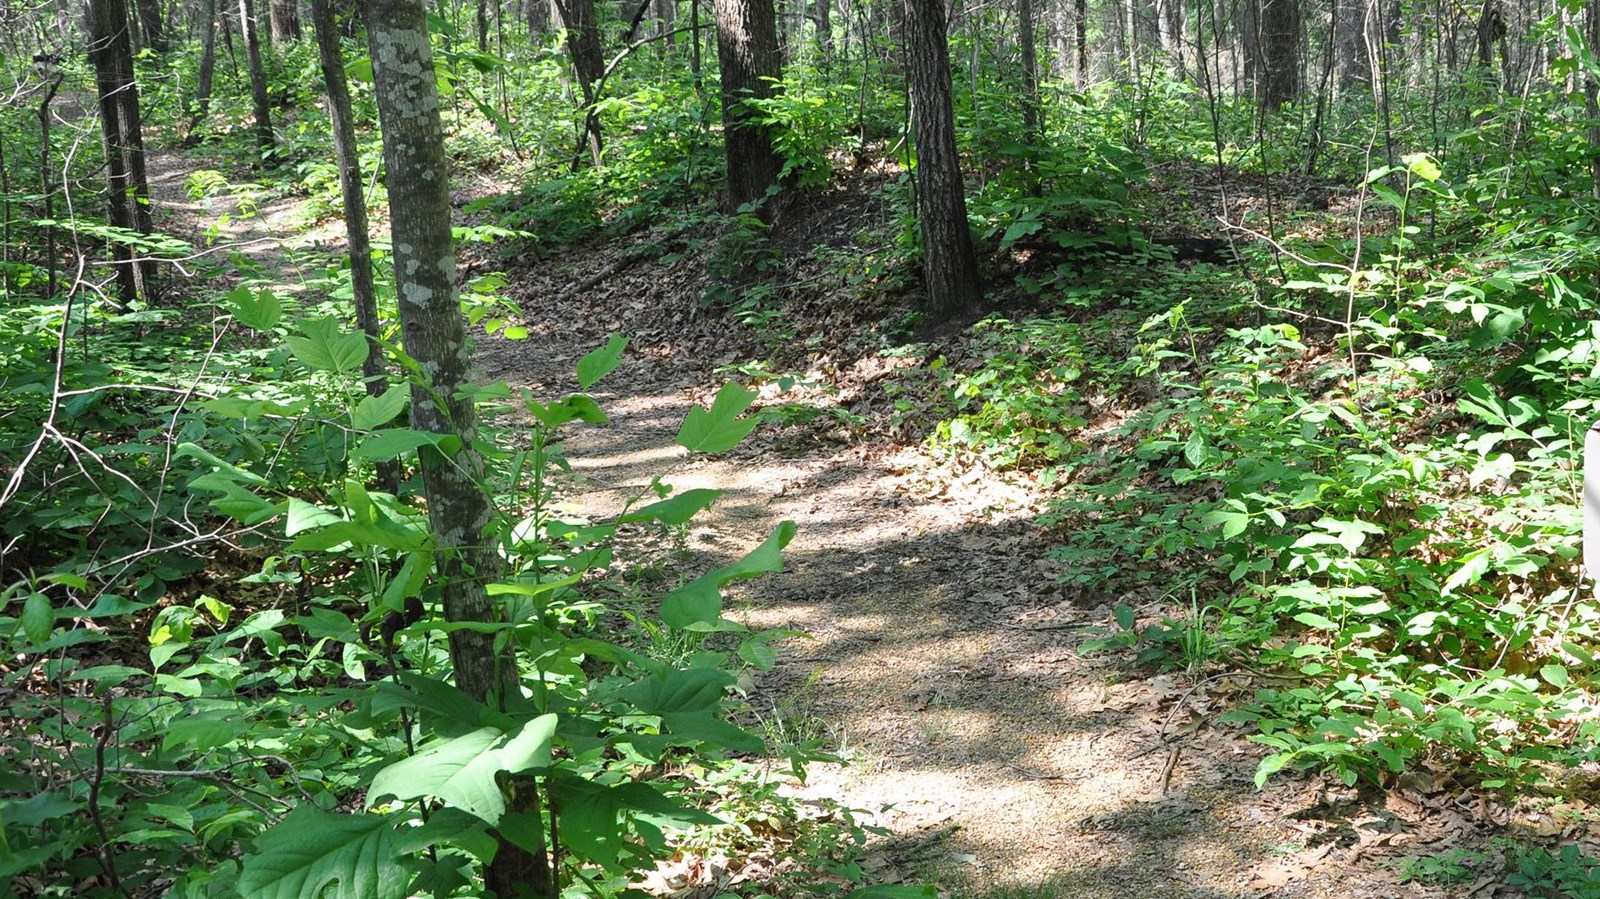 A slightly sunken trail leads through the woods